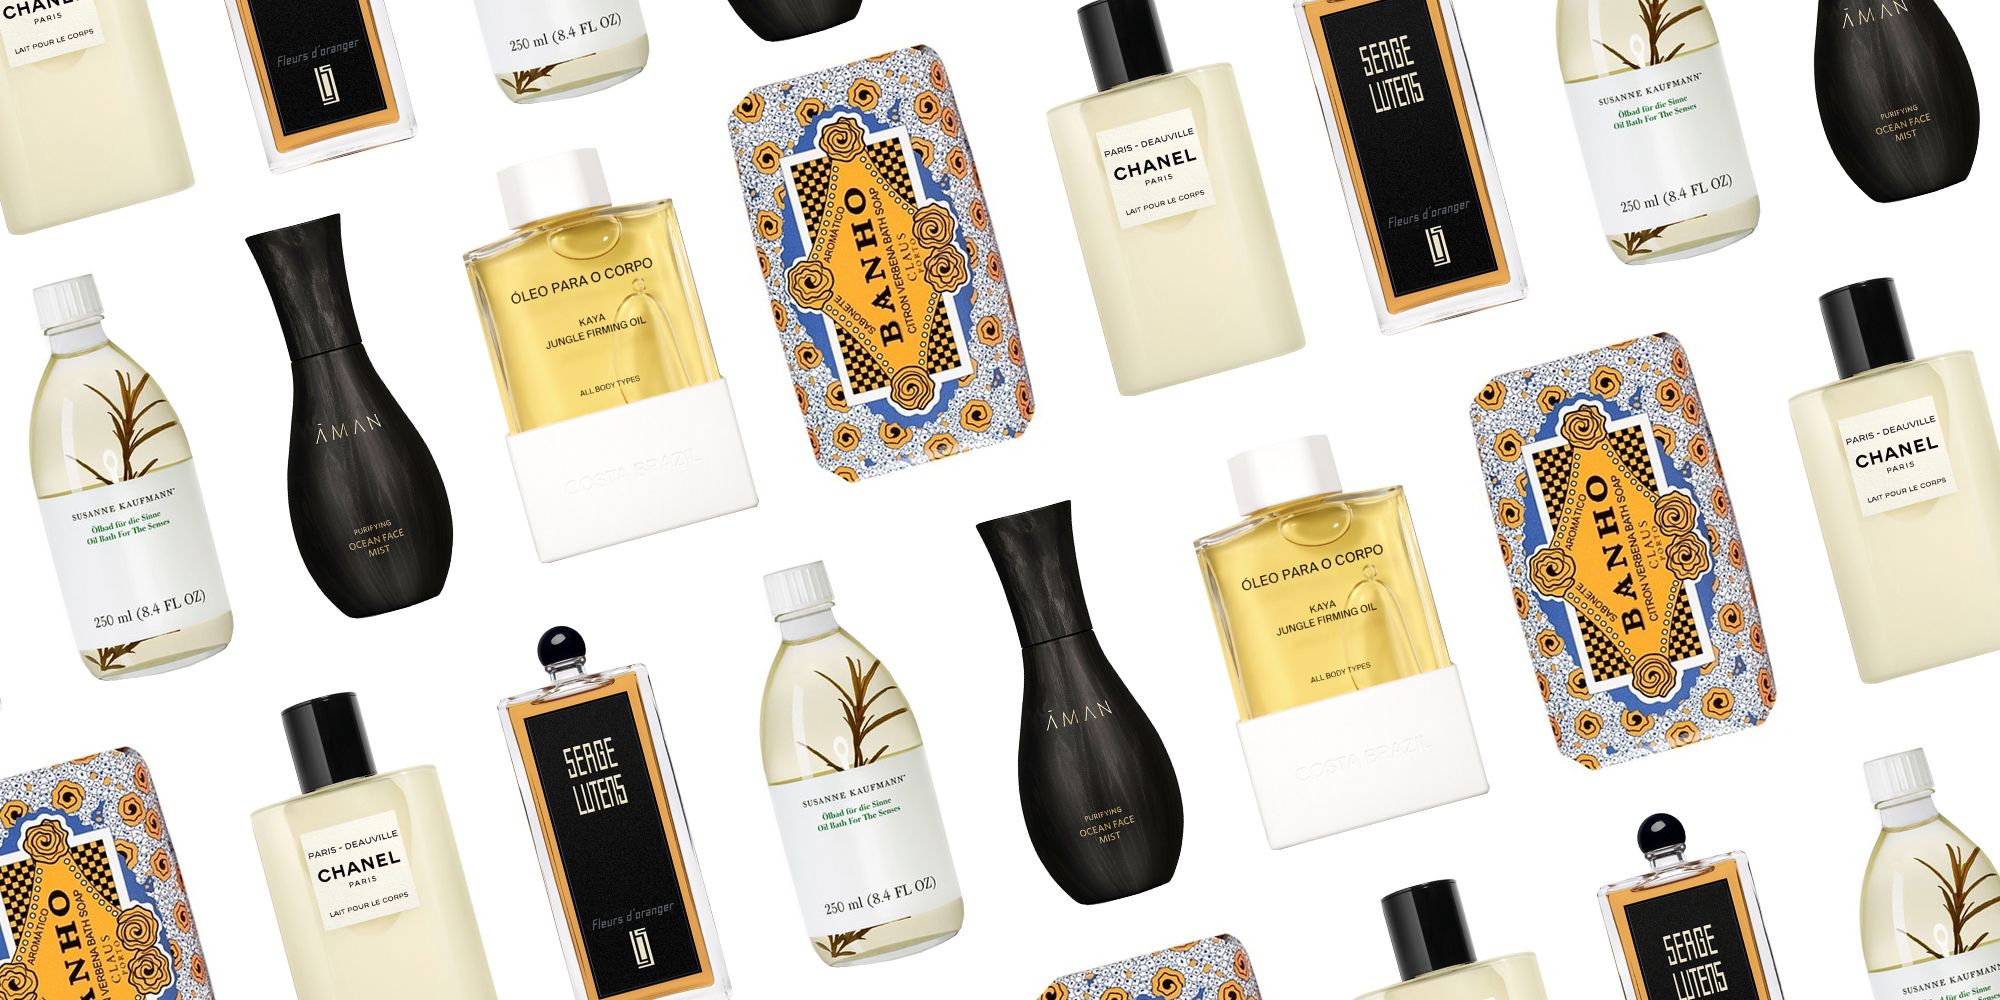 Scents of Travel: Fragrances That Will Take Your Imagination on Vacation -  10 Magazine